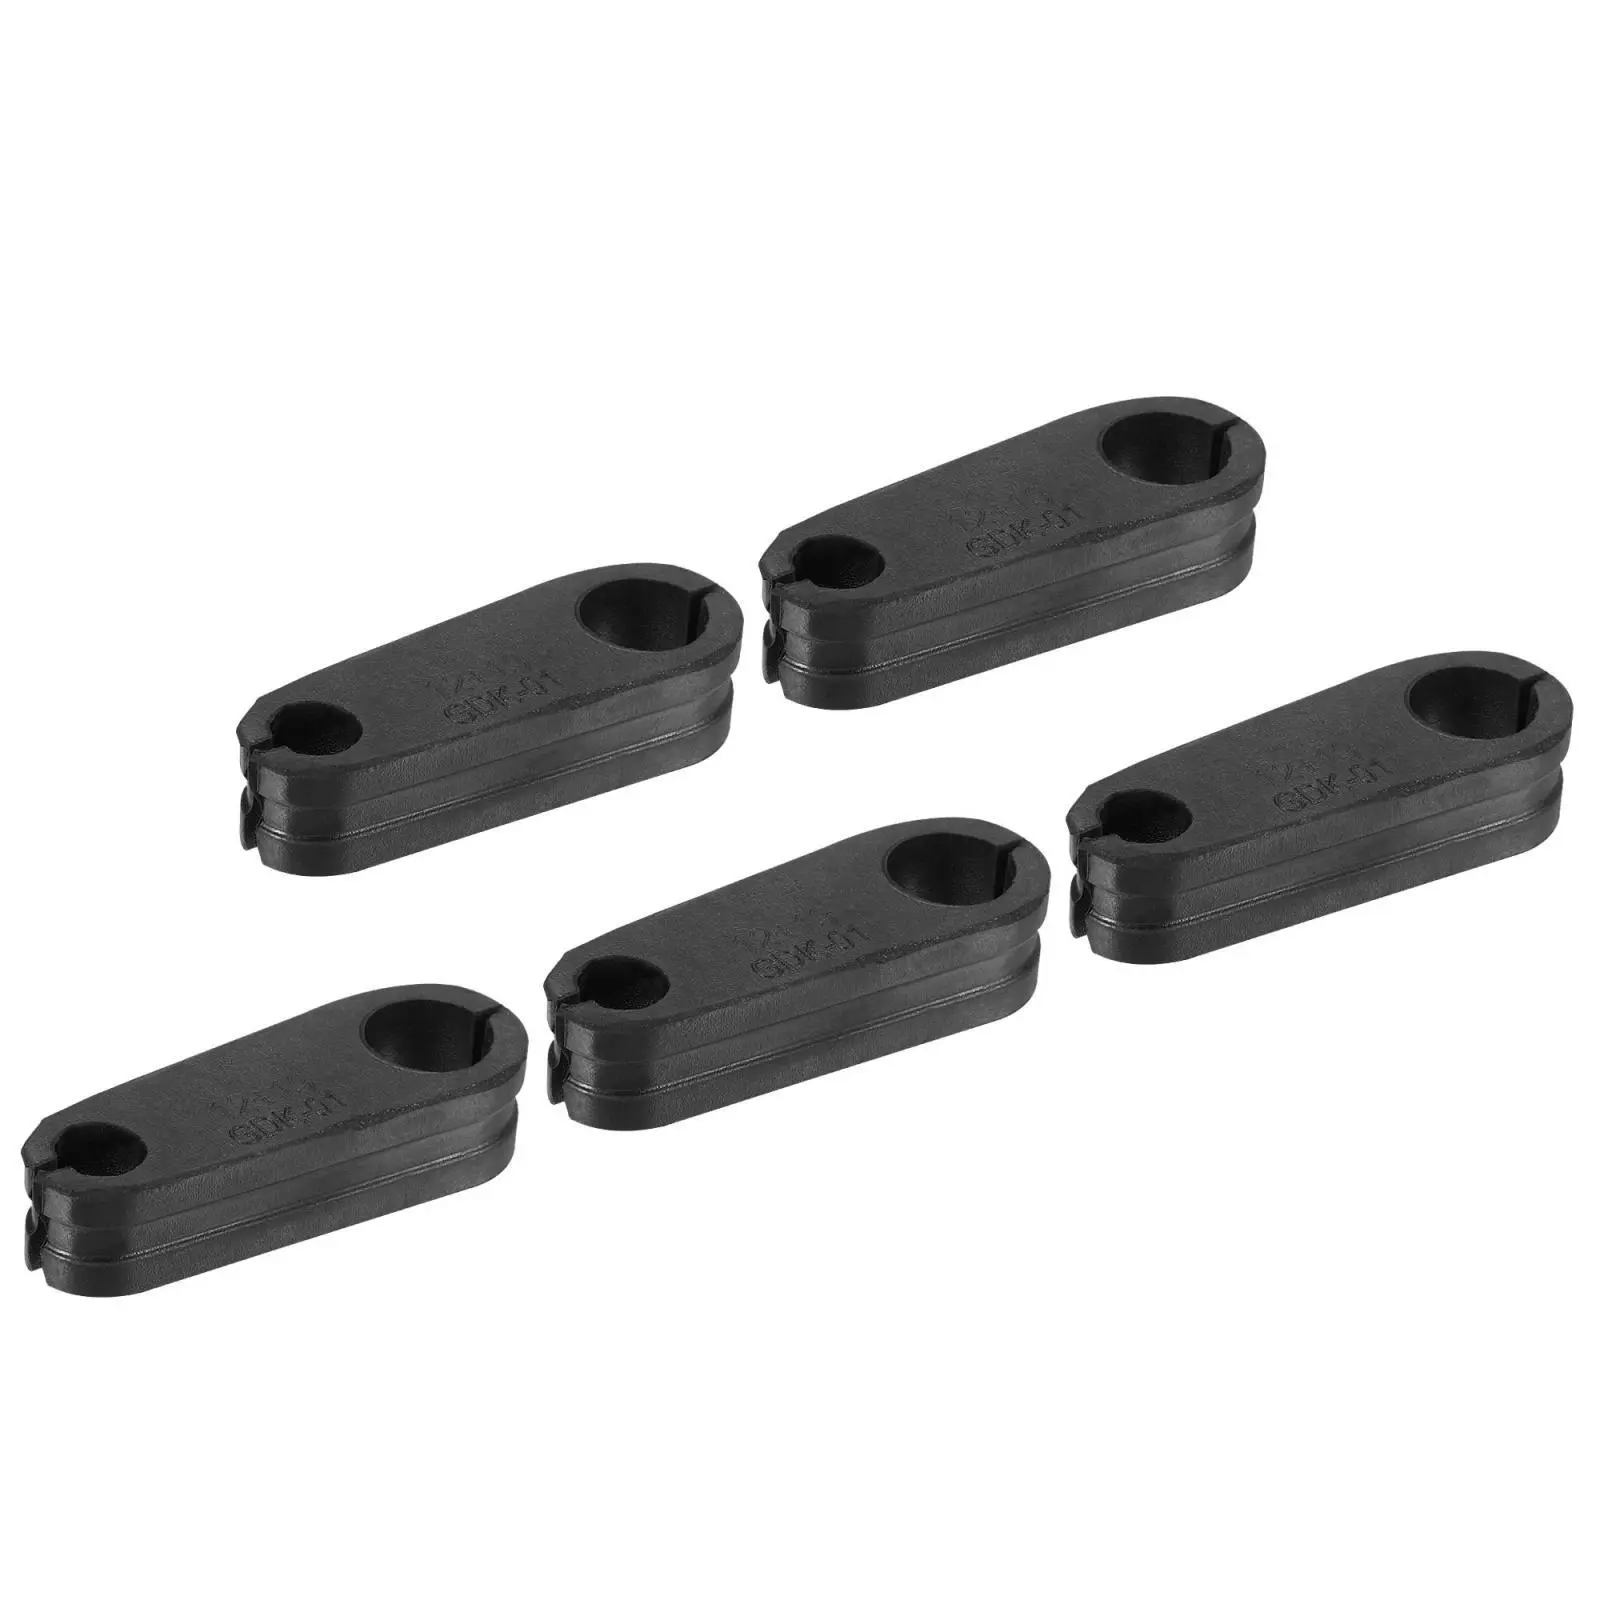 Anti-vibration Block φ19-φ12mm Shock-absorbing Pads for Air Conditioner, 5pcs